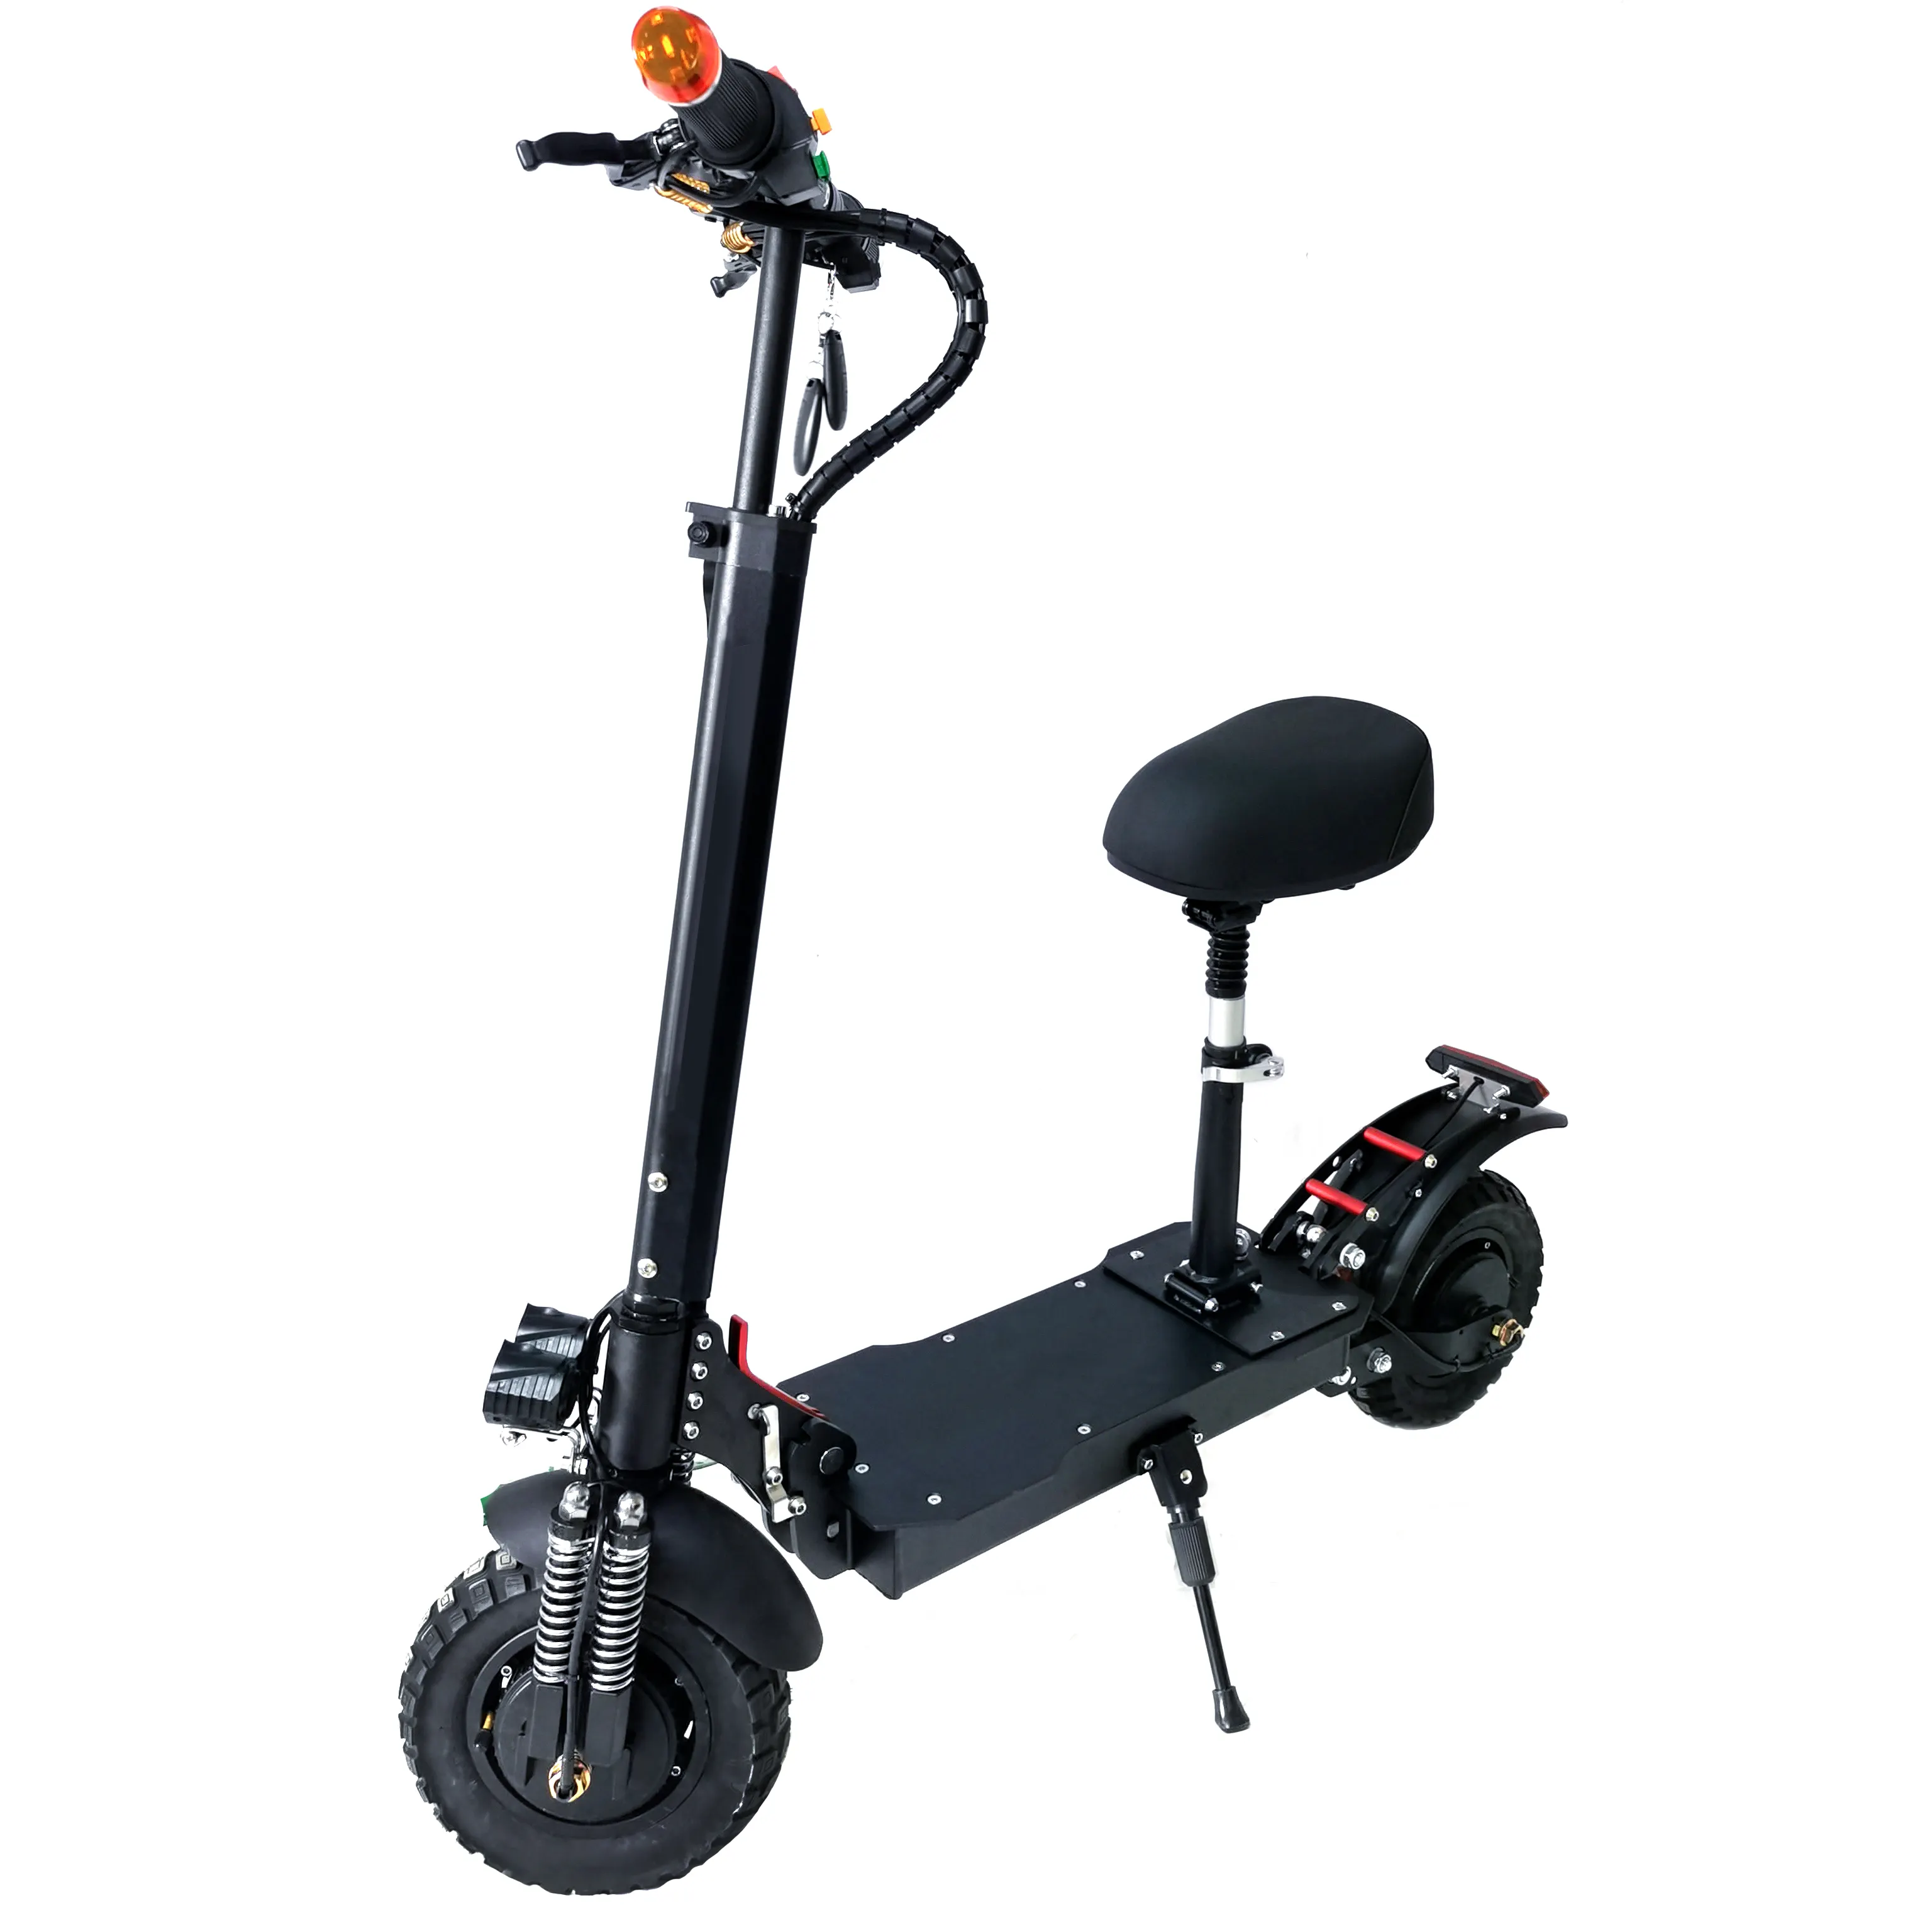 Citycoco Electric Newest Model Europe Warehouse Powerful Off Road 52V 20Ah 2400W 4000W Adult Dual Motor Foldable Dualtron Electric Scooter